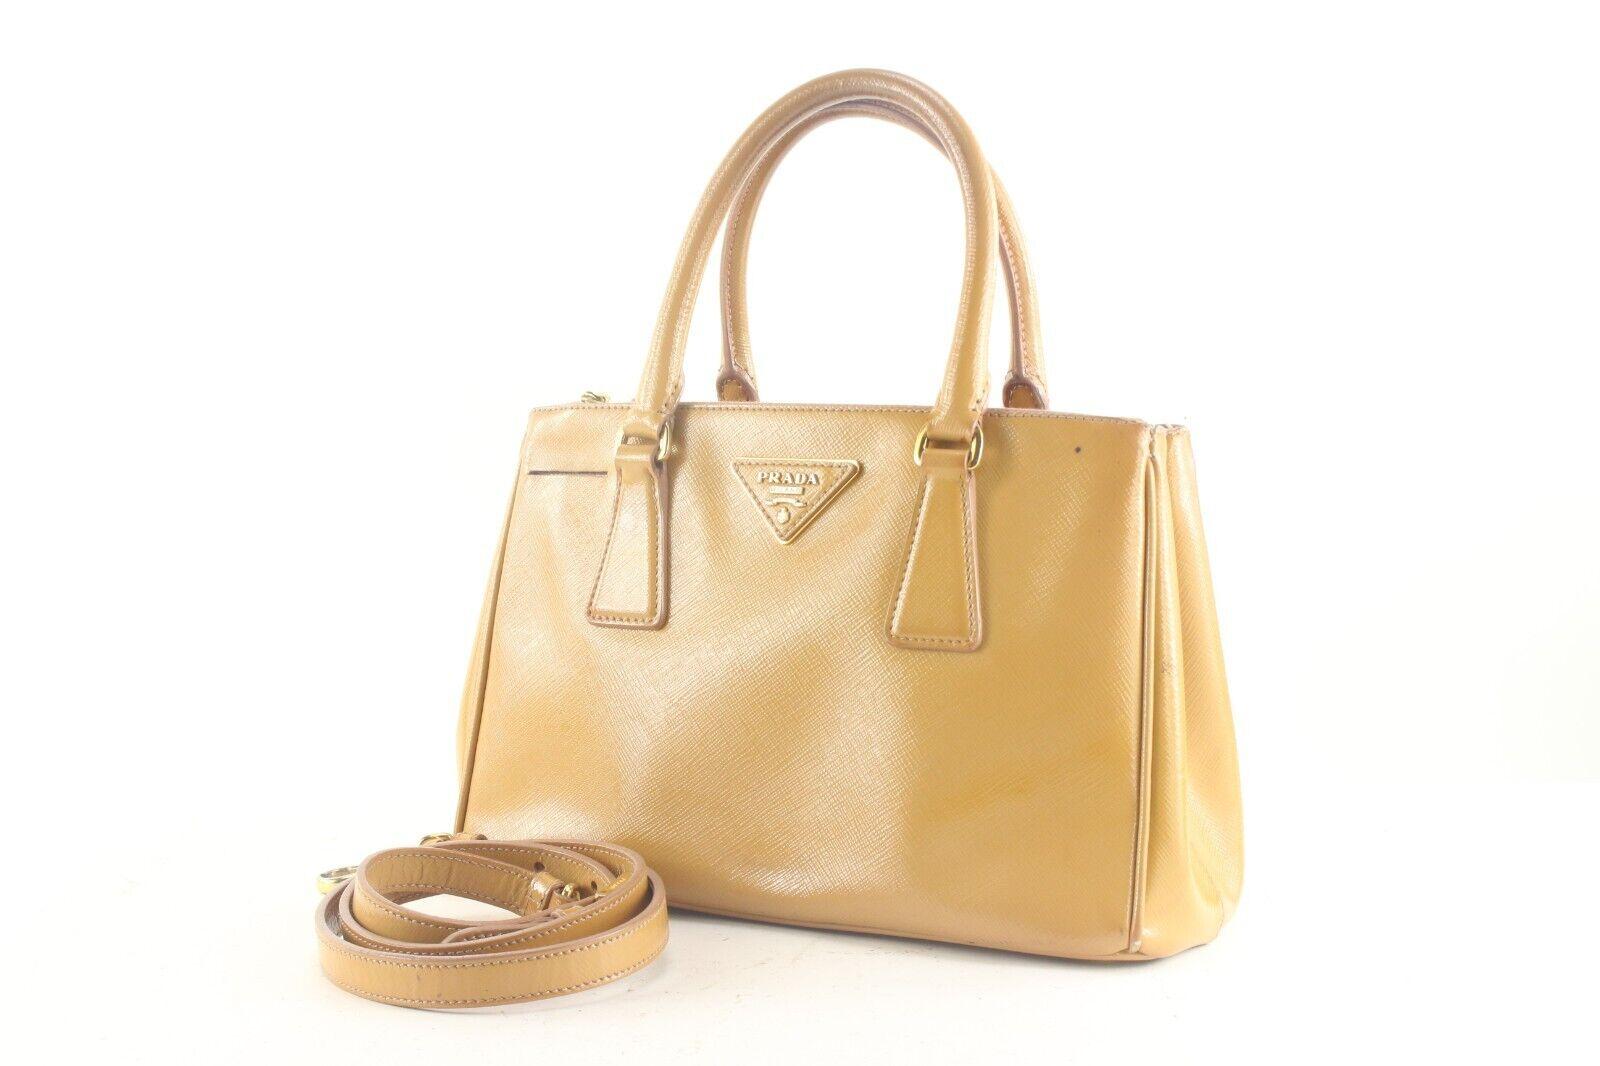 Prada Tan Brown Saffiano Leather Luxe Tote 2way with Strap 3PR831K For Sale 6